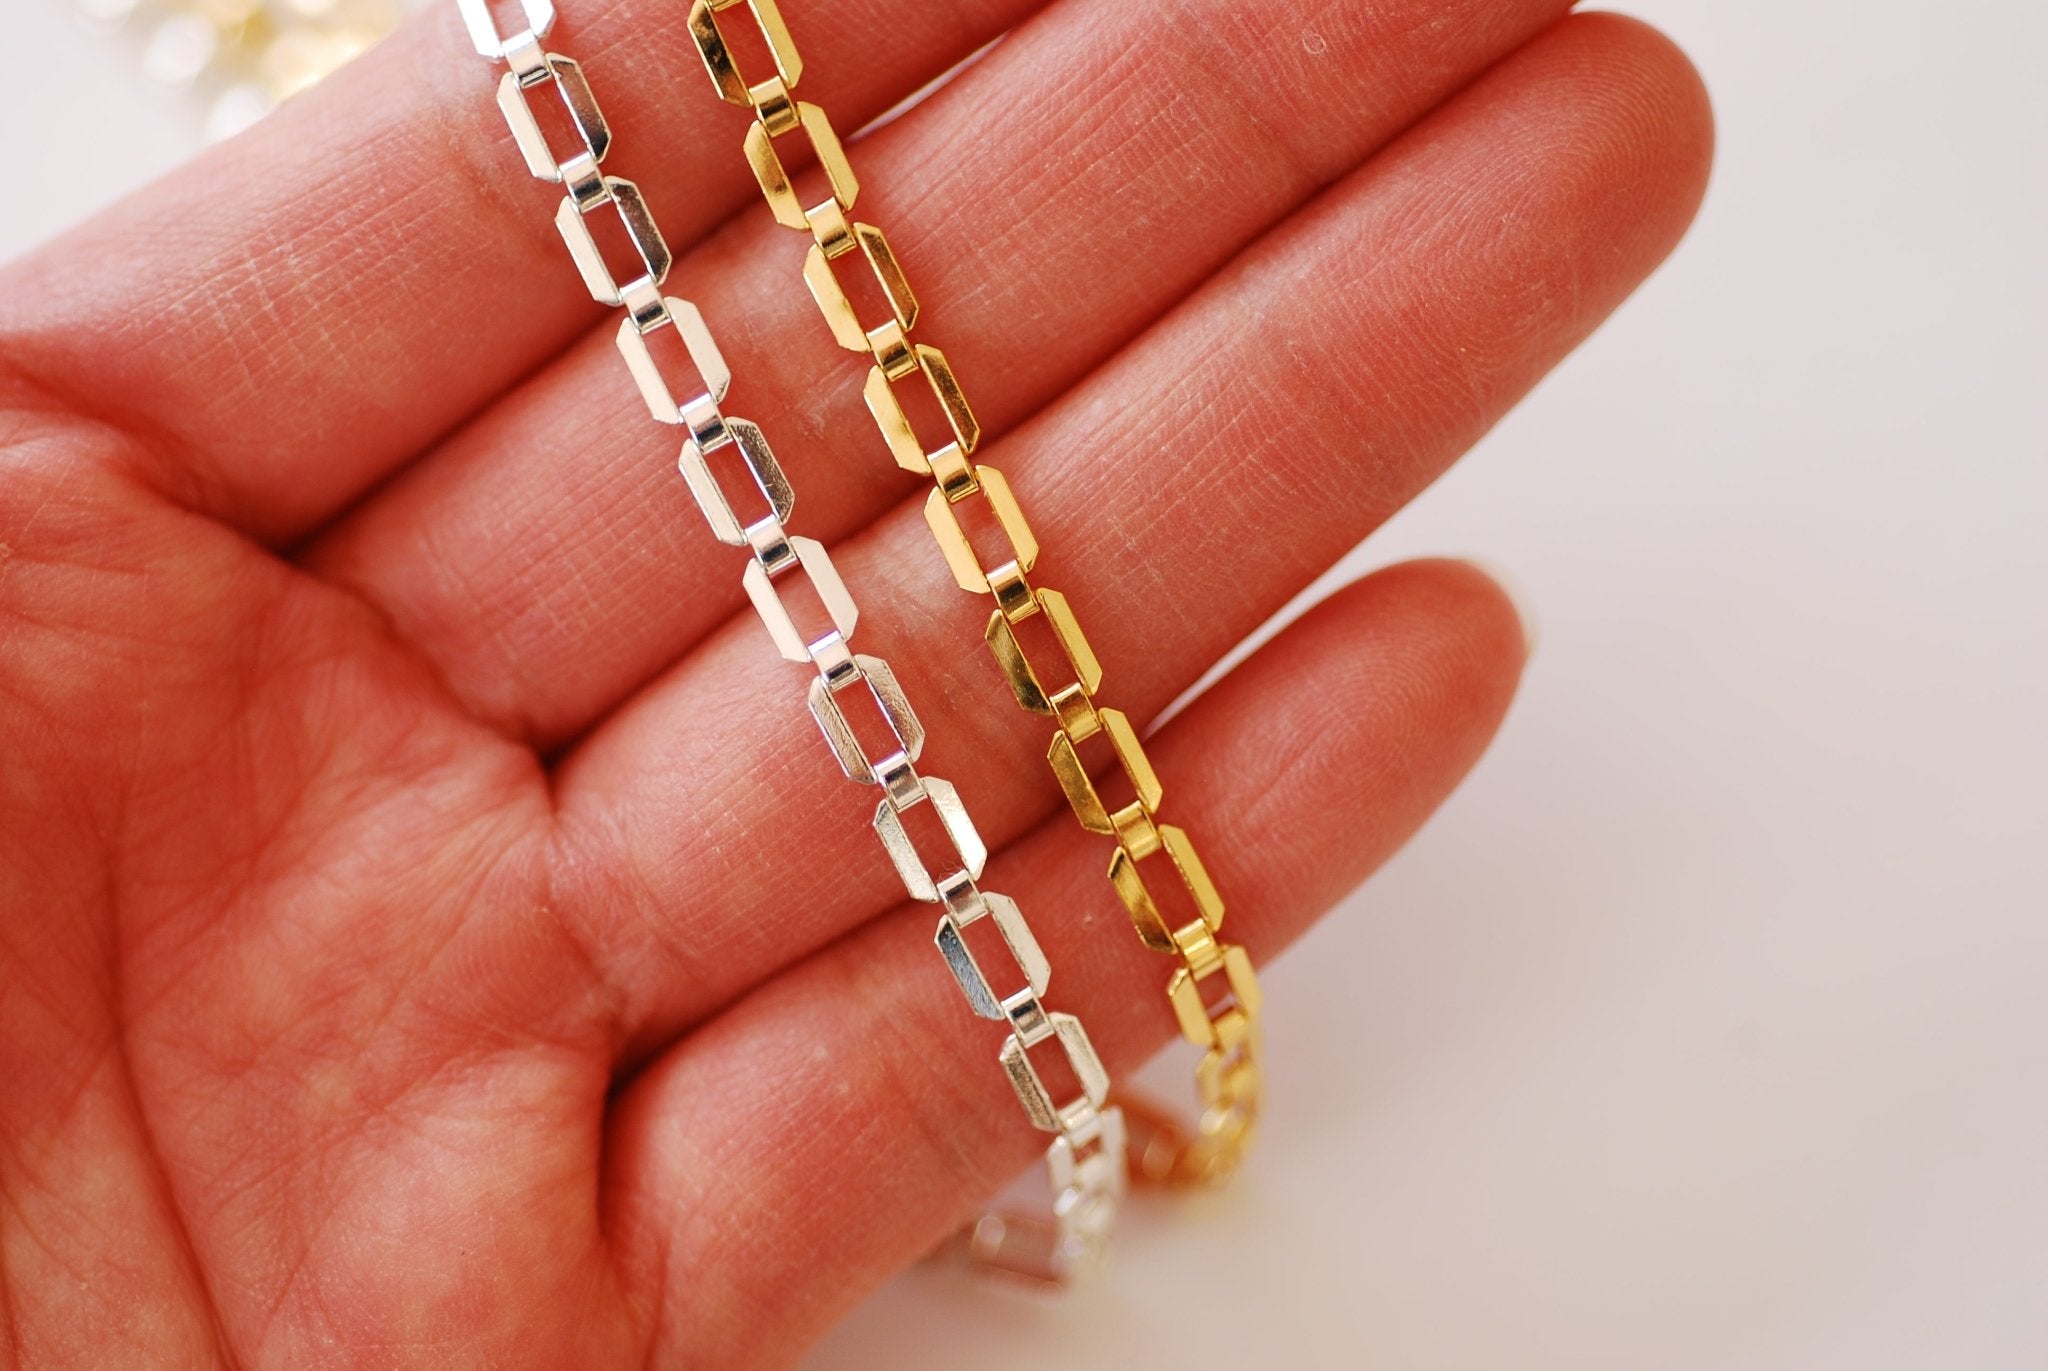 Gold Filled Rectangle Bracelet Chain l 4.3 x 6mm Width Paperclip Chain l Wholesale Bulk Chain Gold Filled Sterling Silver Permanent Jewelry - HarperCrown